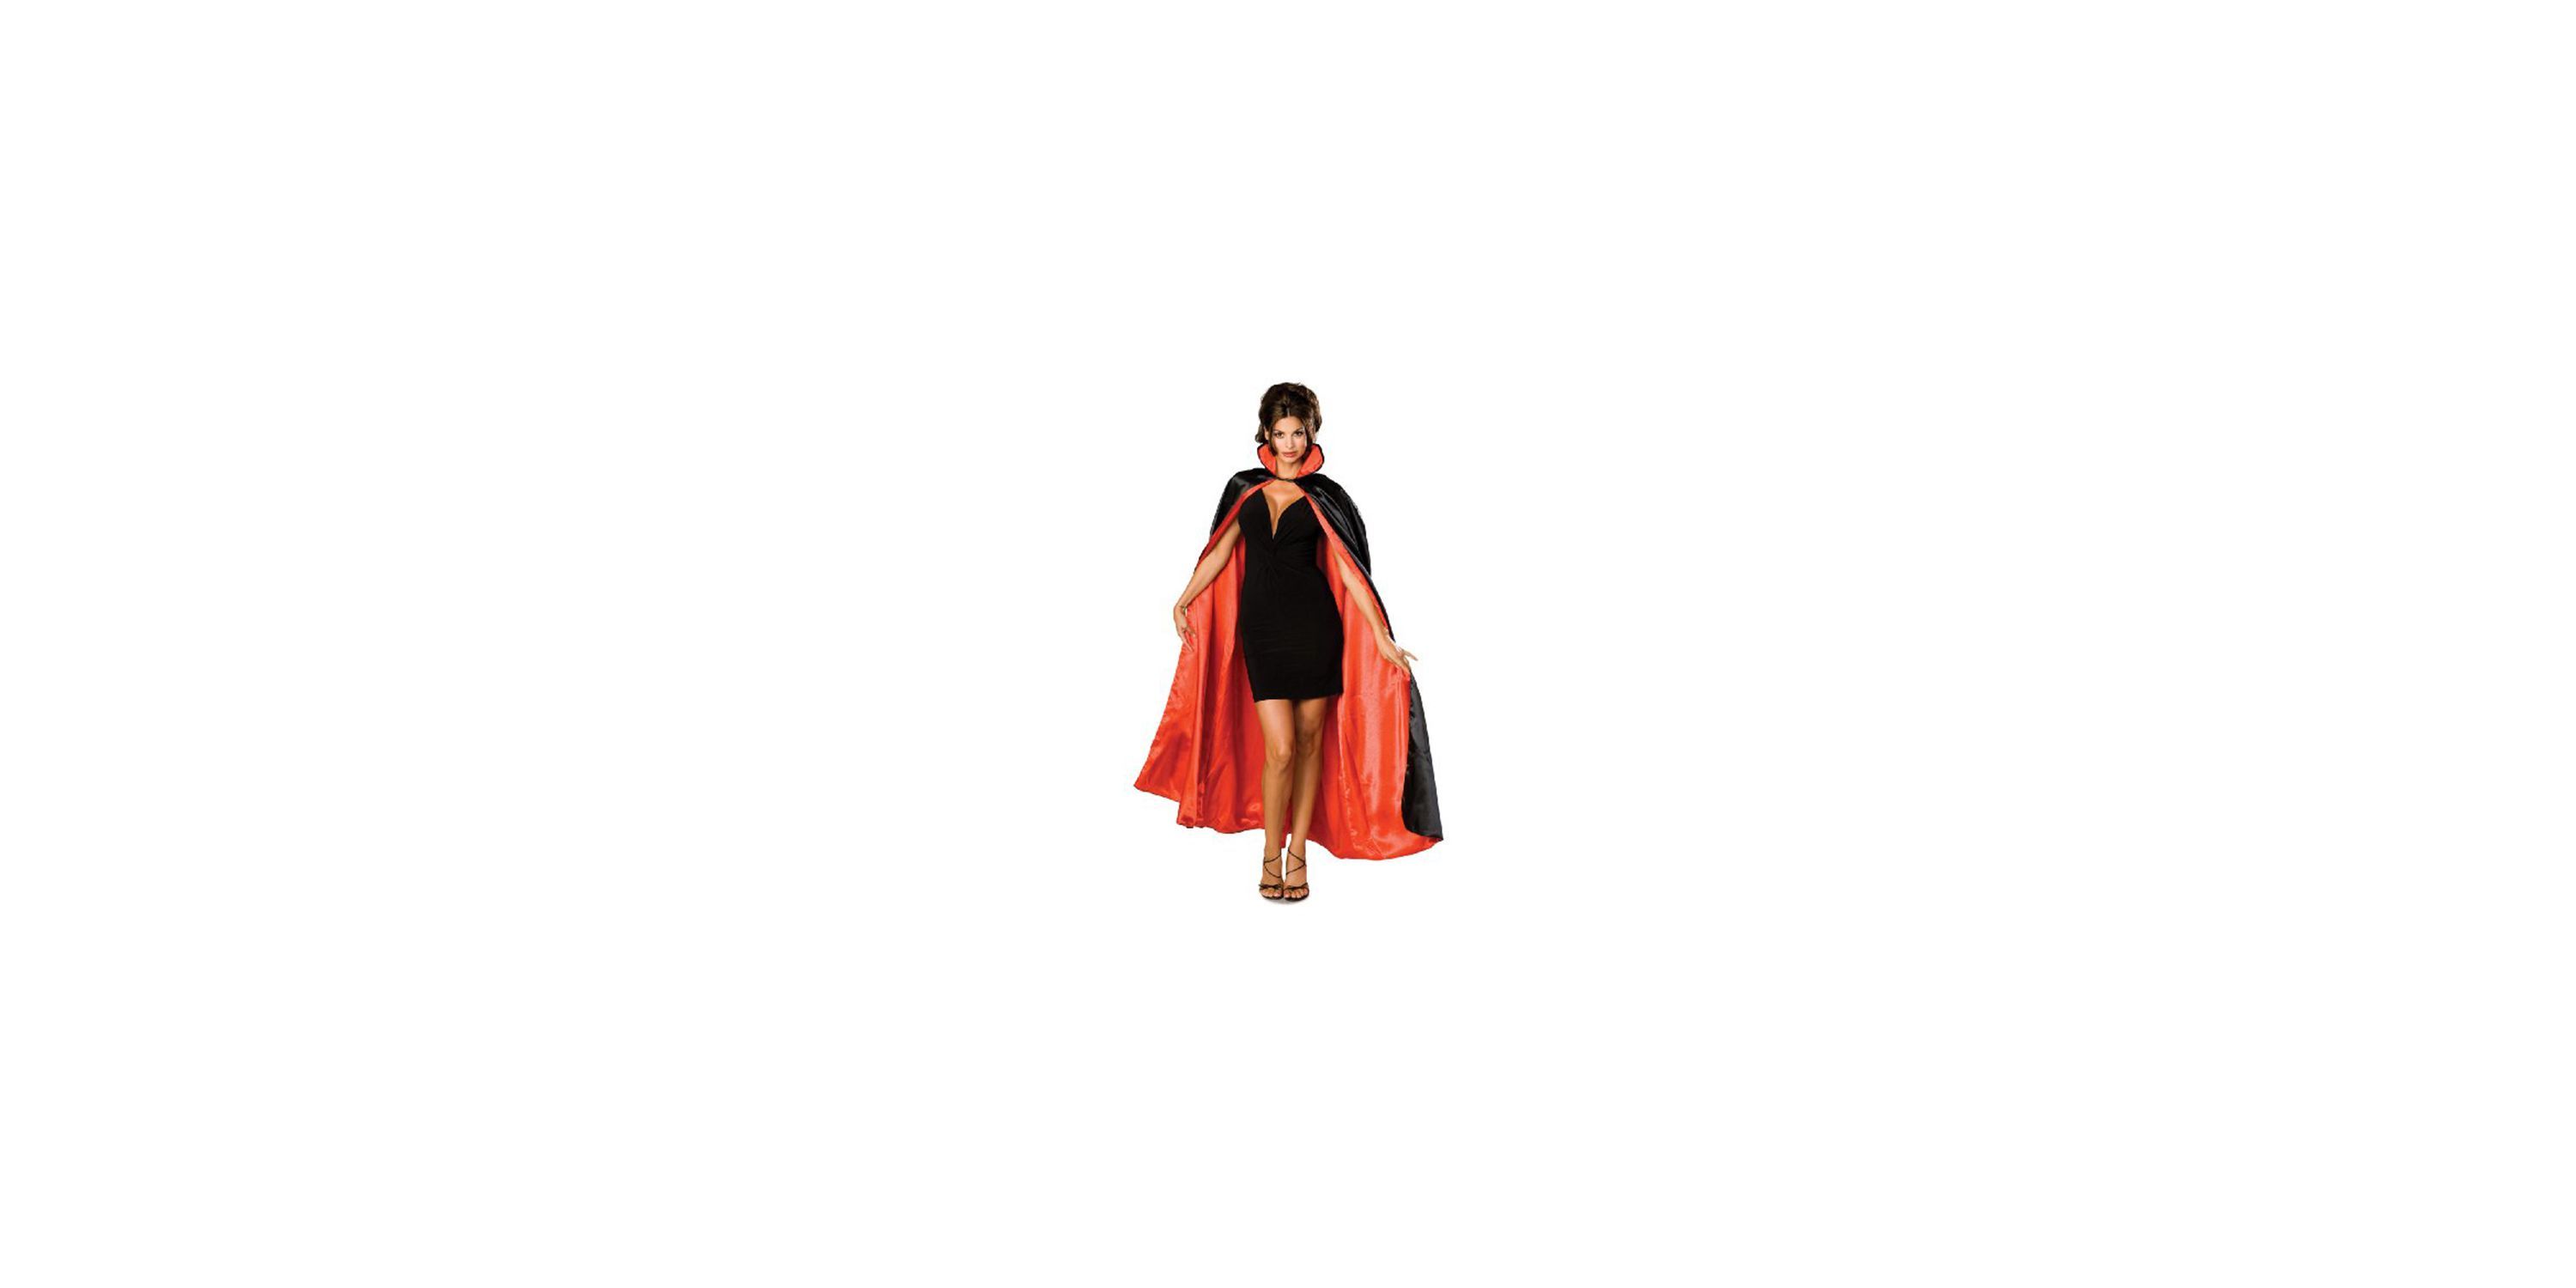 Black and Red Cape